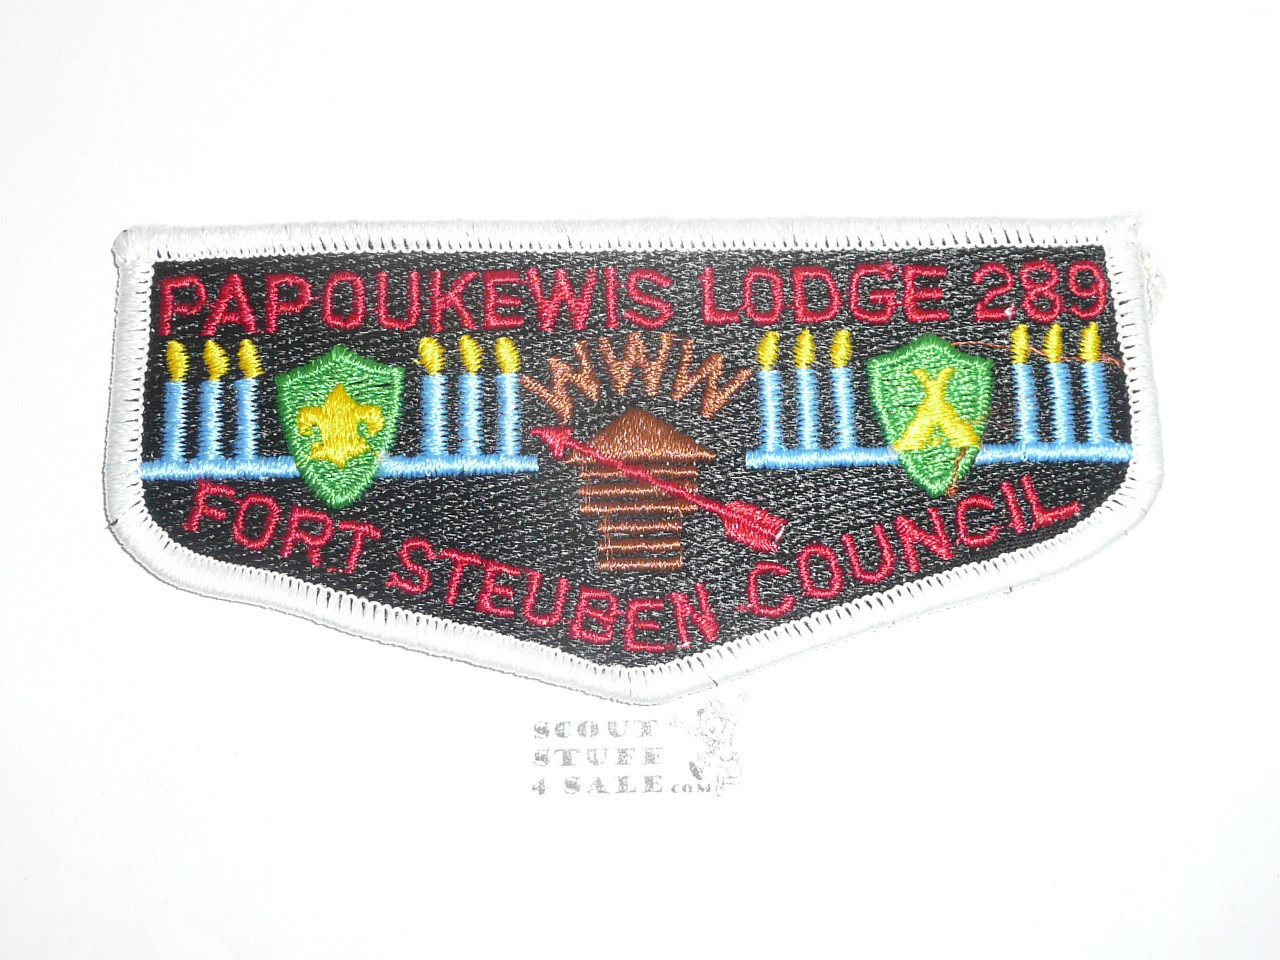 Order of the Arrow Lodge #289 Papoukewis s3 Flap Patch